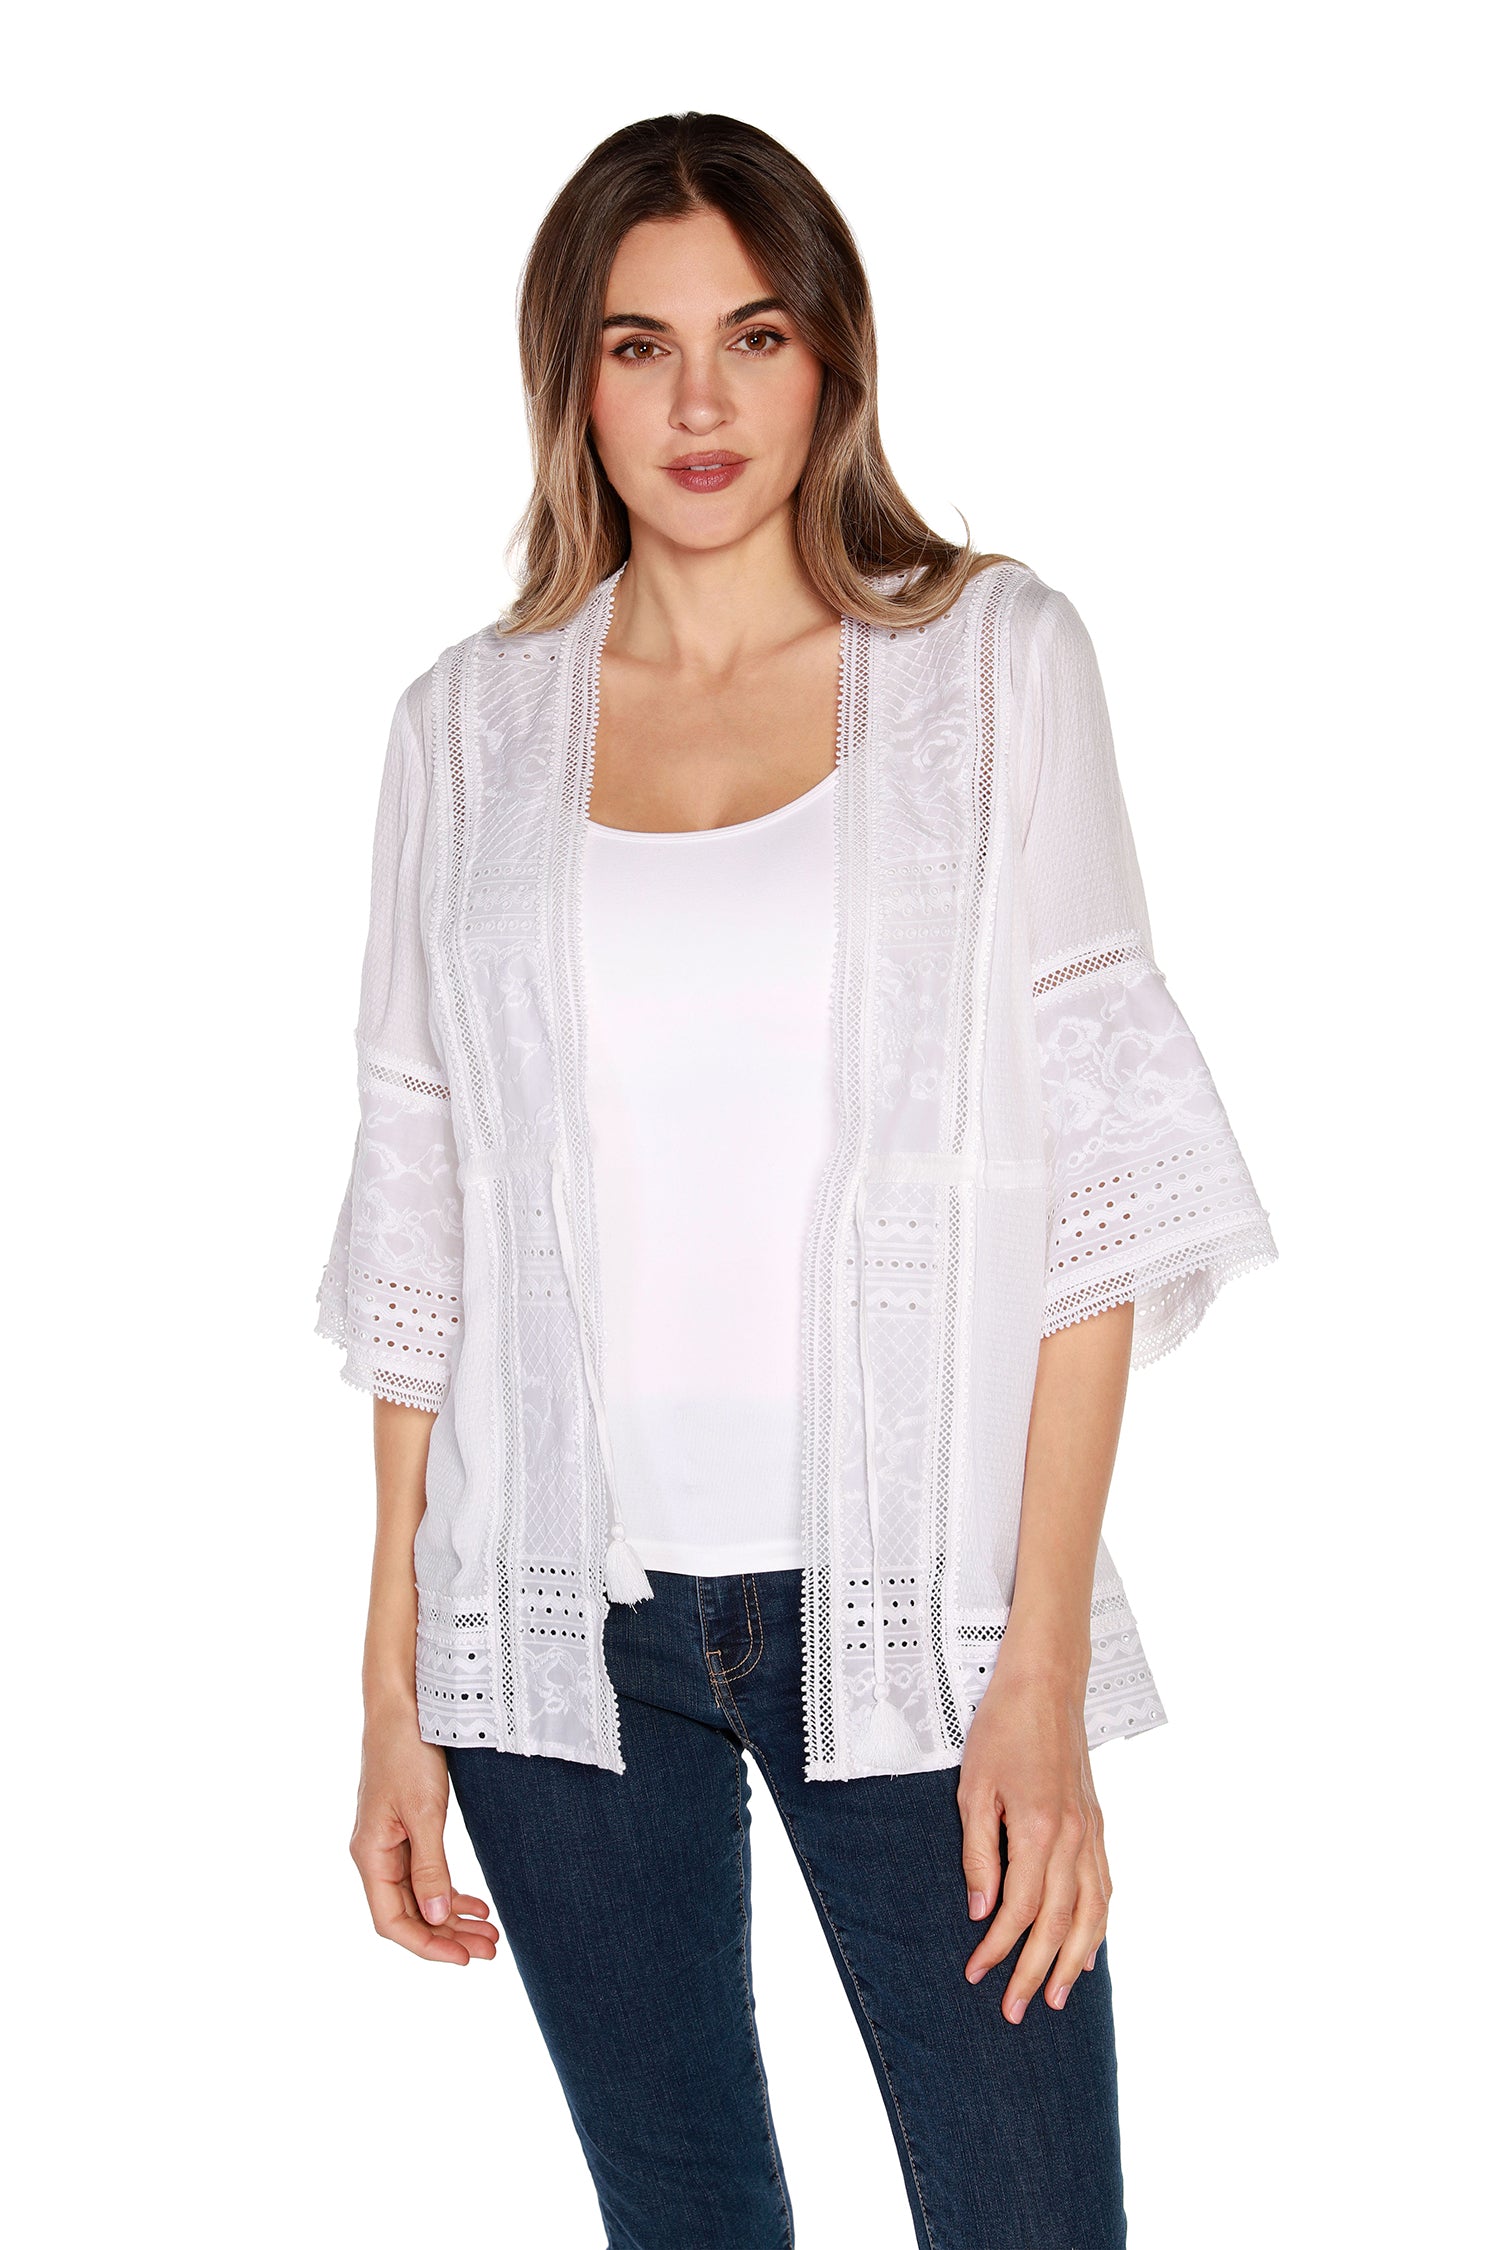 Women's Cotton Kimono with Eyelet Lace and Embroidery